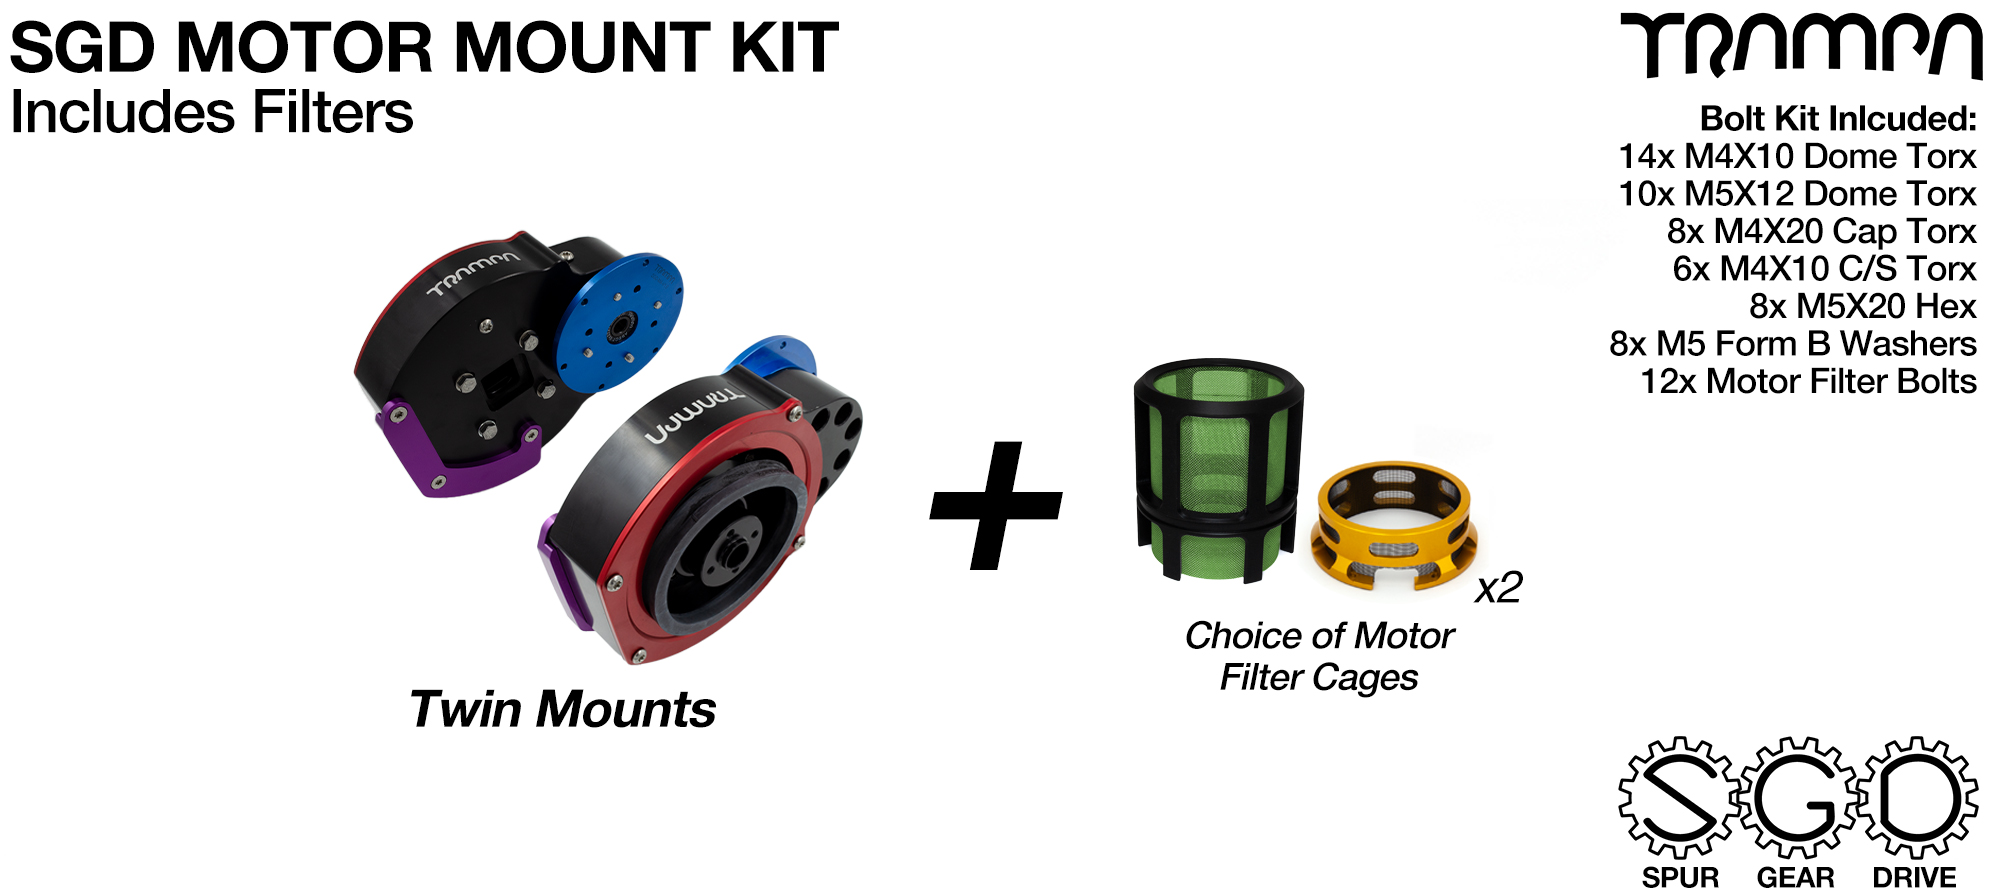 Mountainboard Spur Gear Drive TWIN Motor Mount with FILTERS - NO Pulleys & NO Motors 